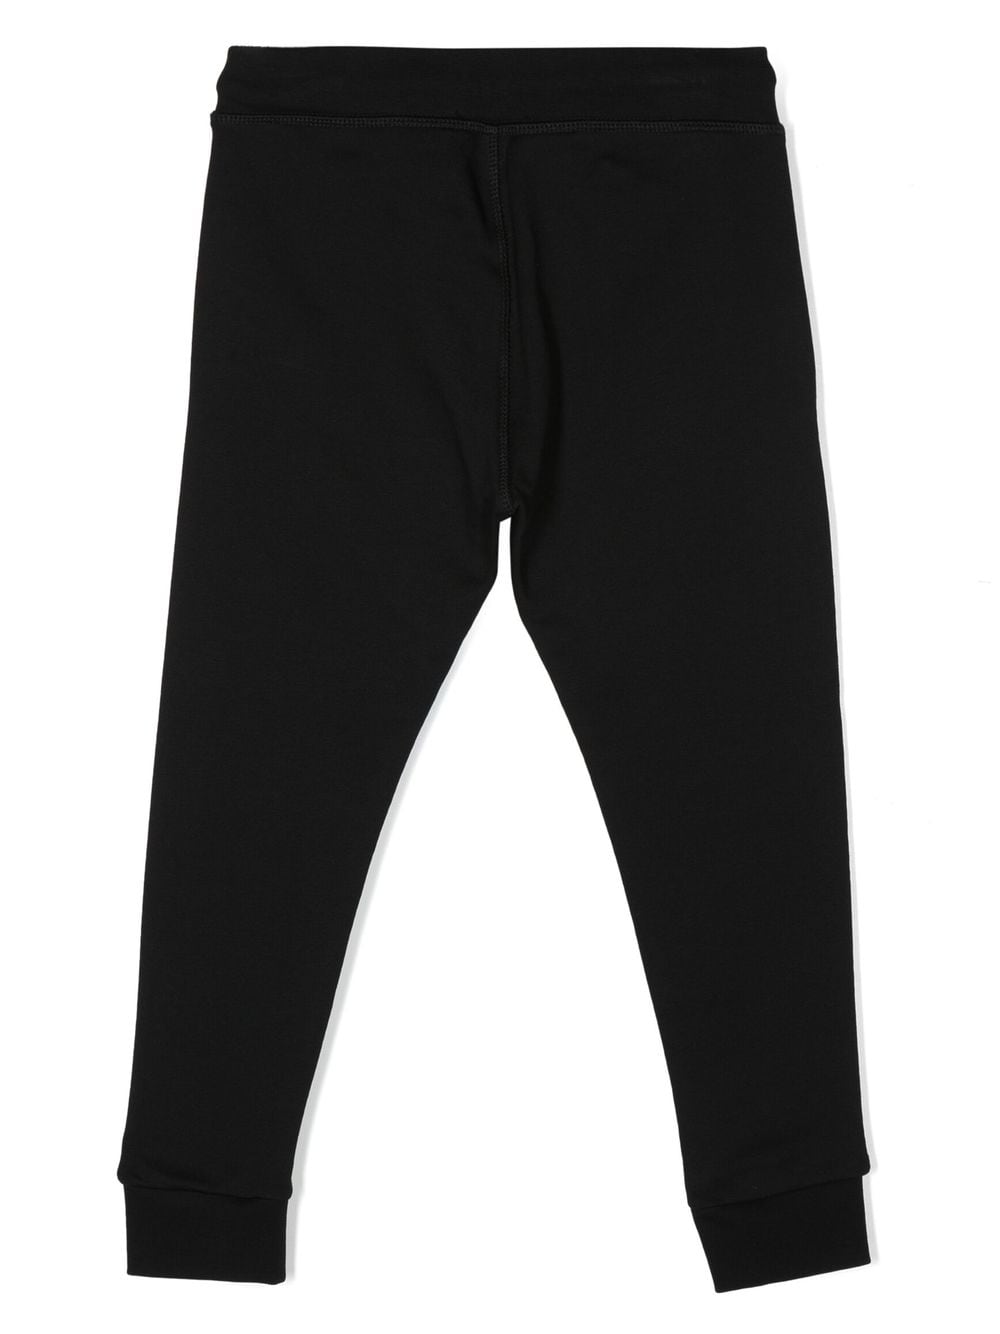 Black sports trousers for children